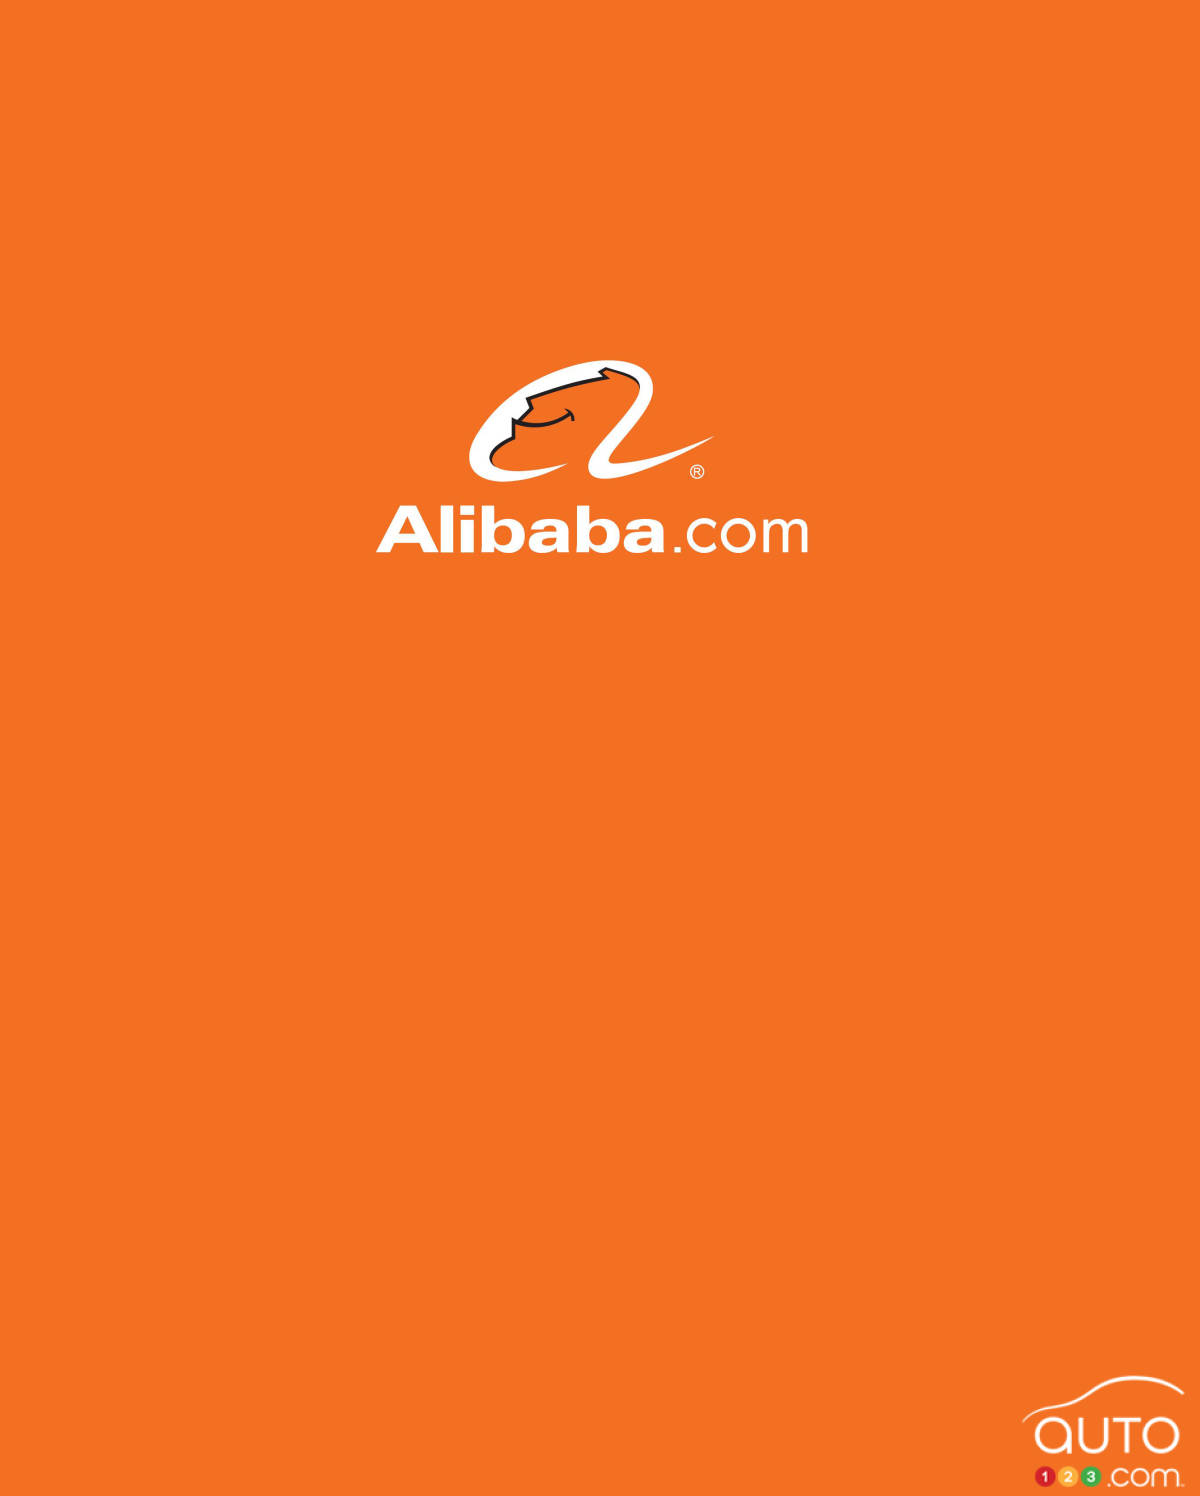 China's Alibaba may launch connected car by 2016